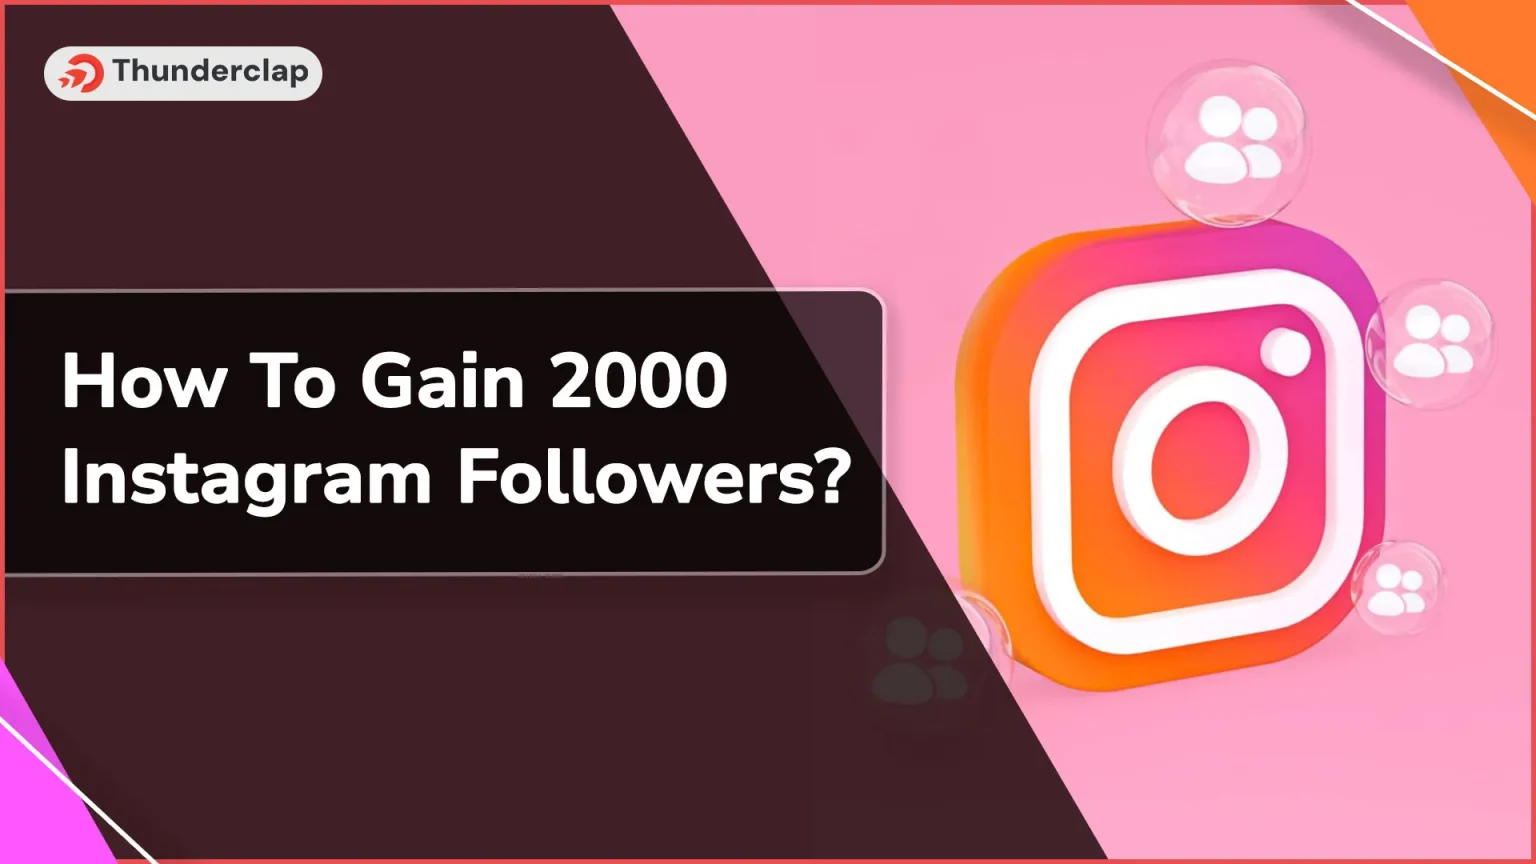 How To Gain 2000 Instagram Followers